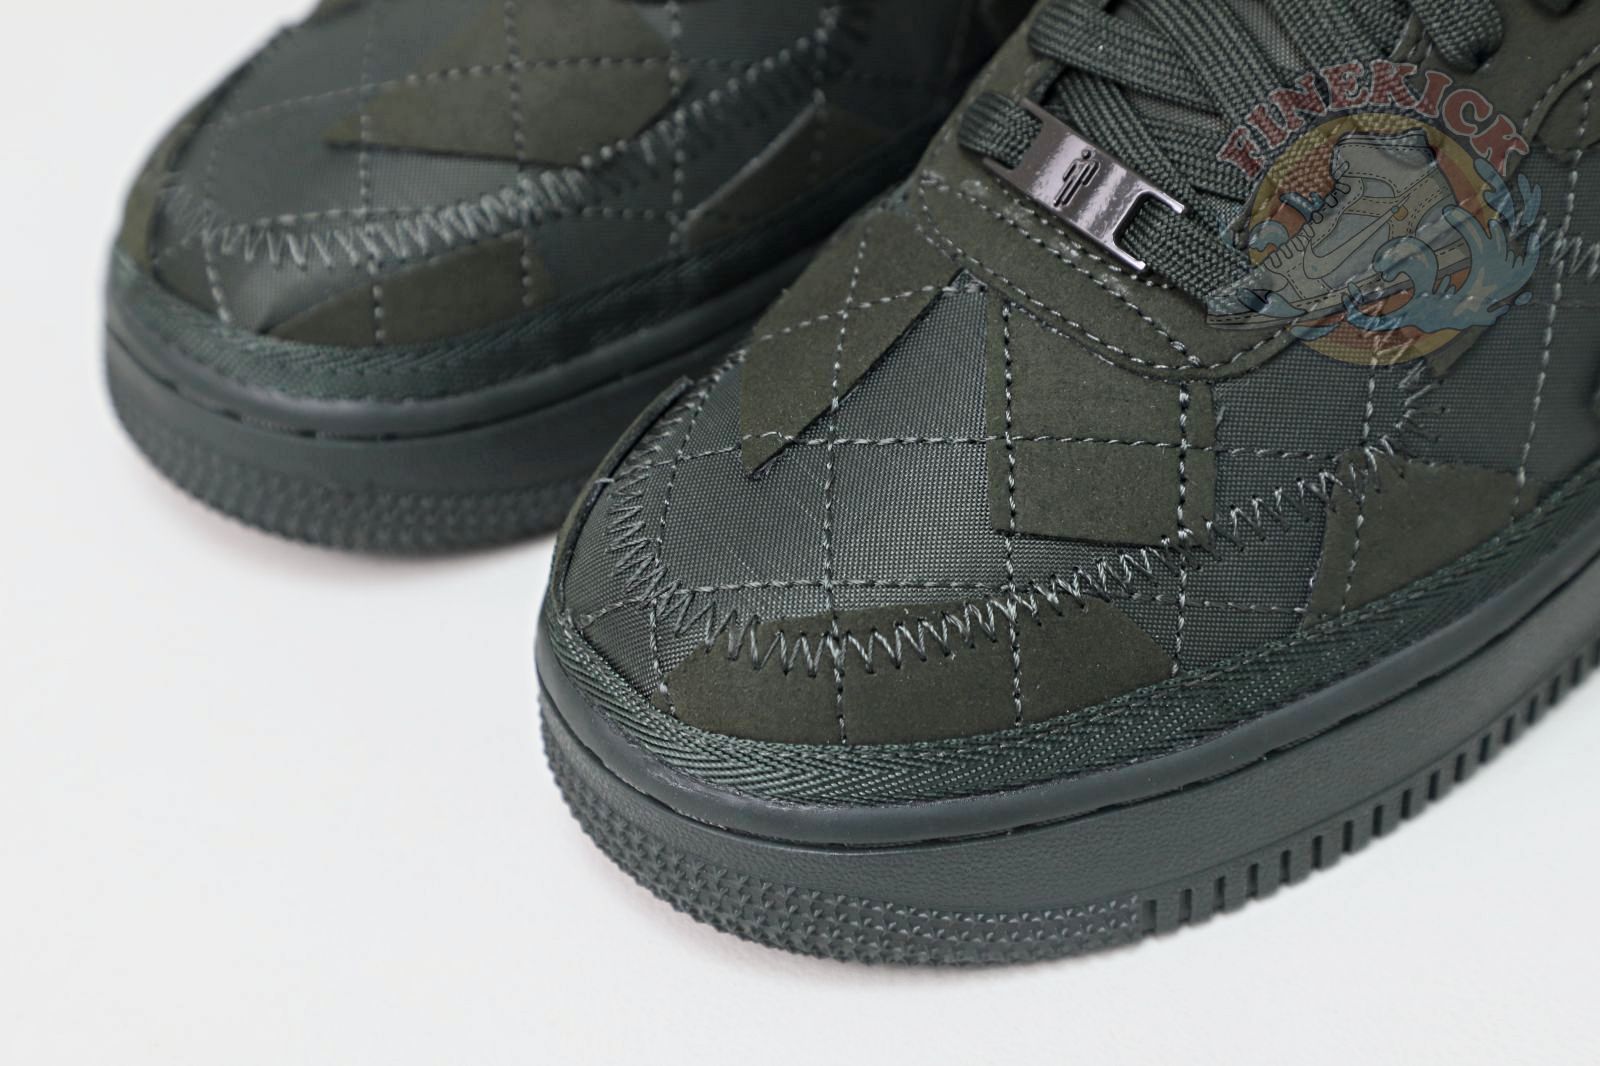 Nike Air Force 1 Low sequoia